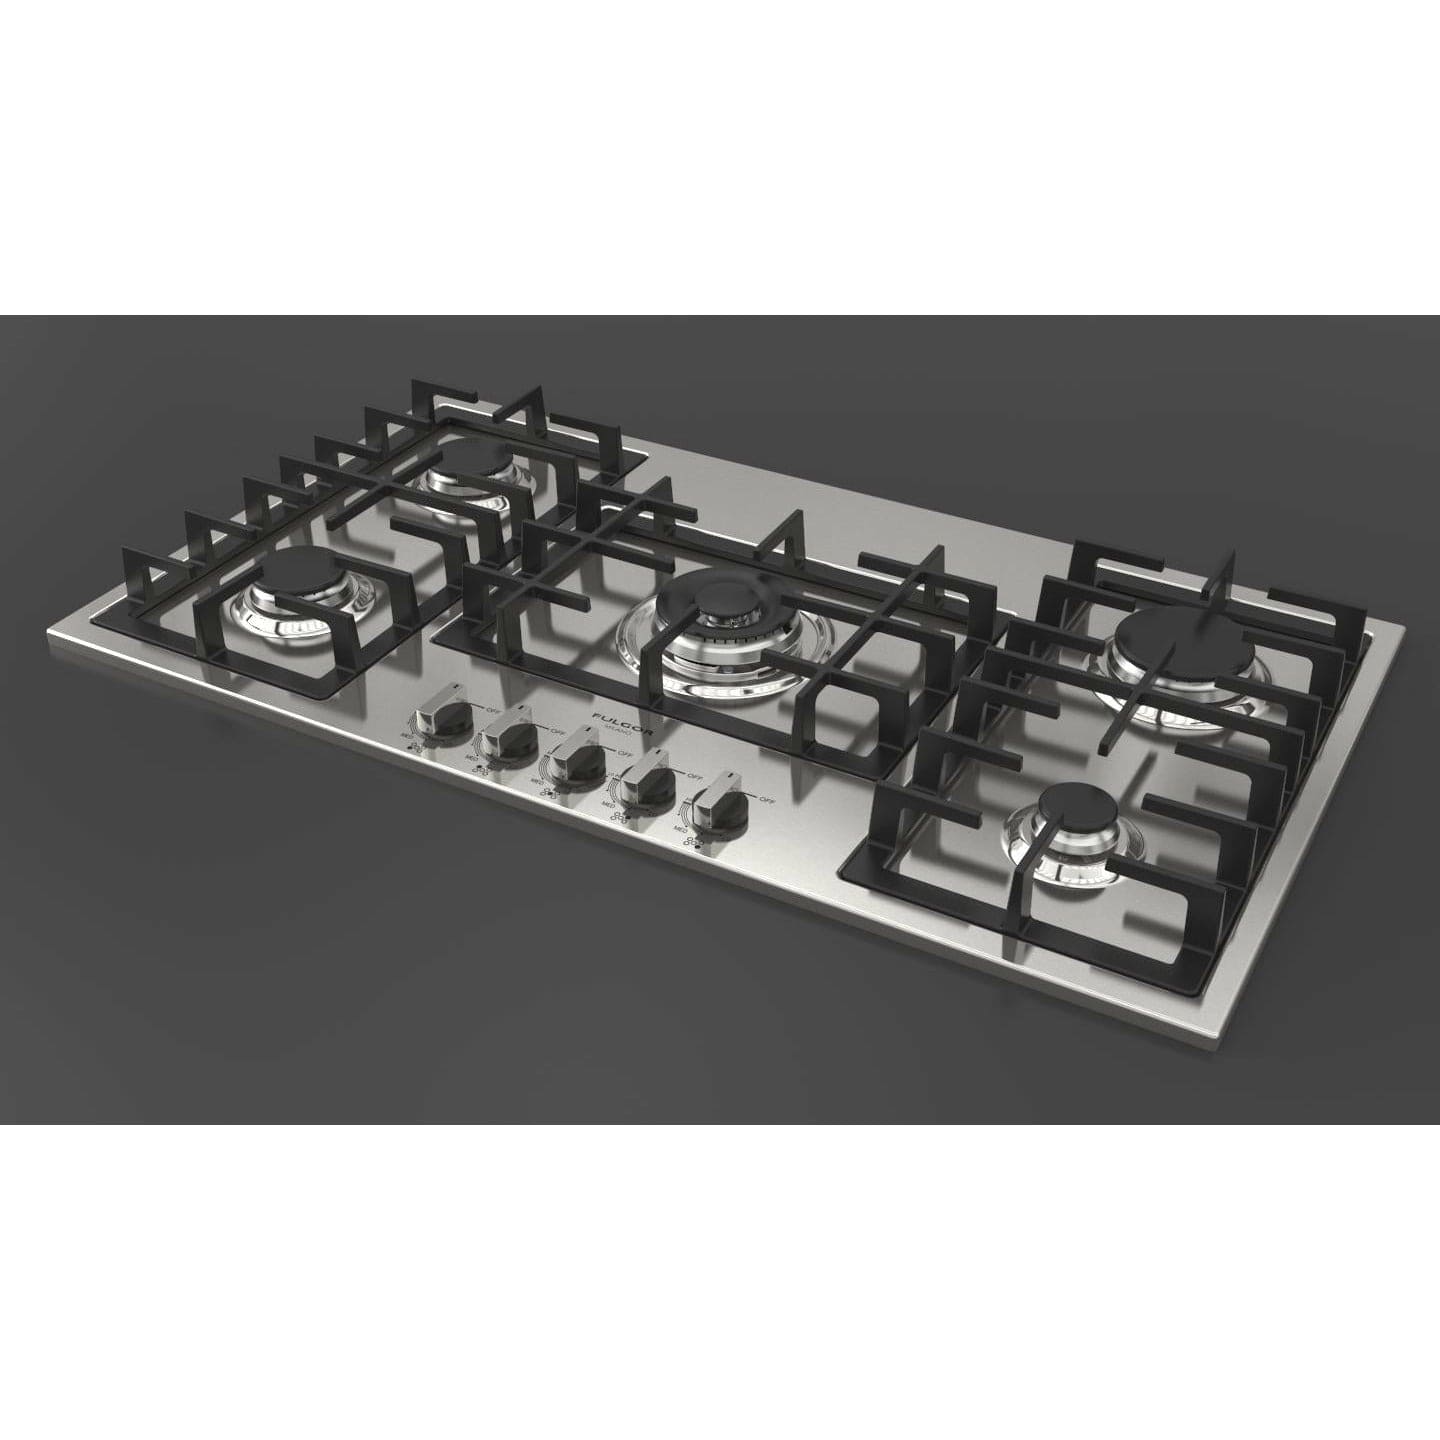 Fulgor Milano 36" Gas Cooktop with 5 European Sealed Burners - F4GK36S1 Cooktops F4GK36S1 Luxury Appliances Direct